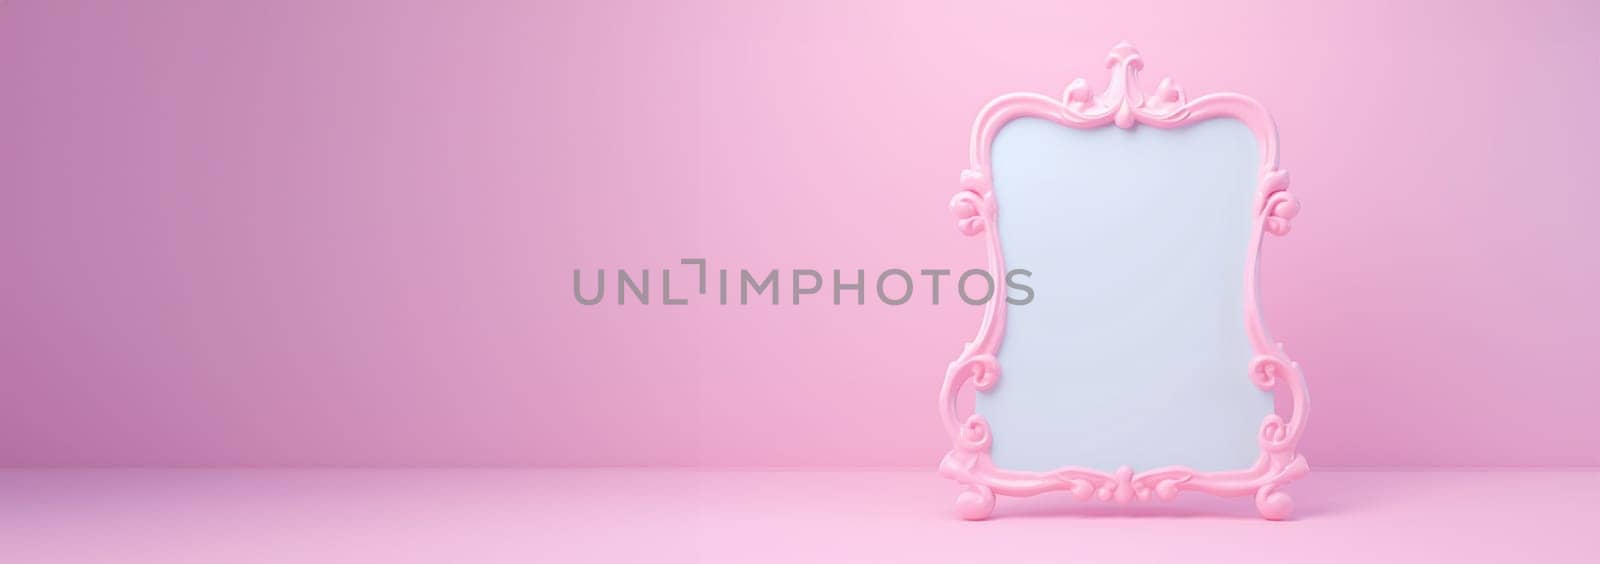 Antique vintage 3D mirror pastel colored. Beauty design for banner with Makeup mirror Copy space. Pink,purple blue background. Beauty design Space for text